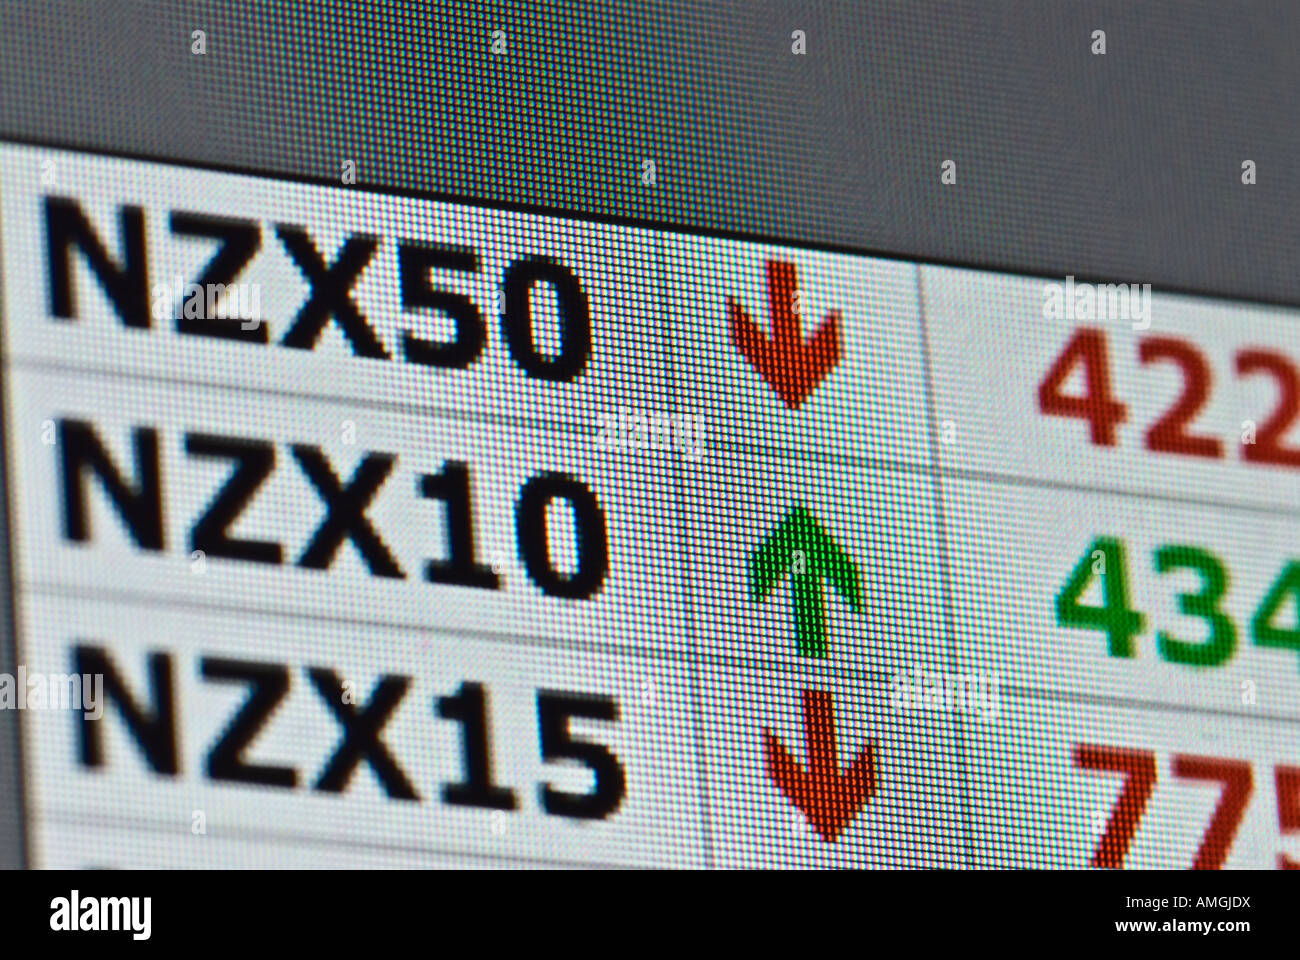 New Zealand stock indices on screen Stock Photo